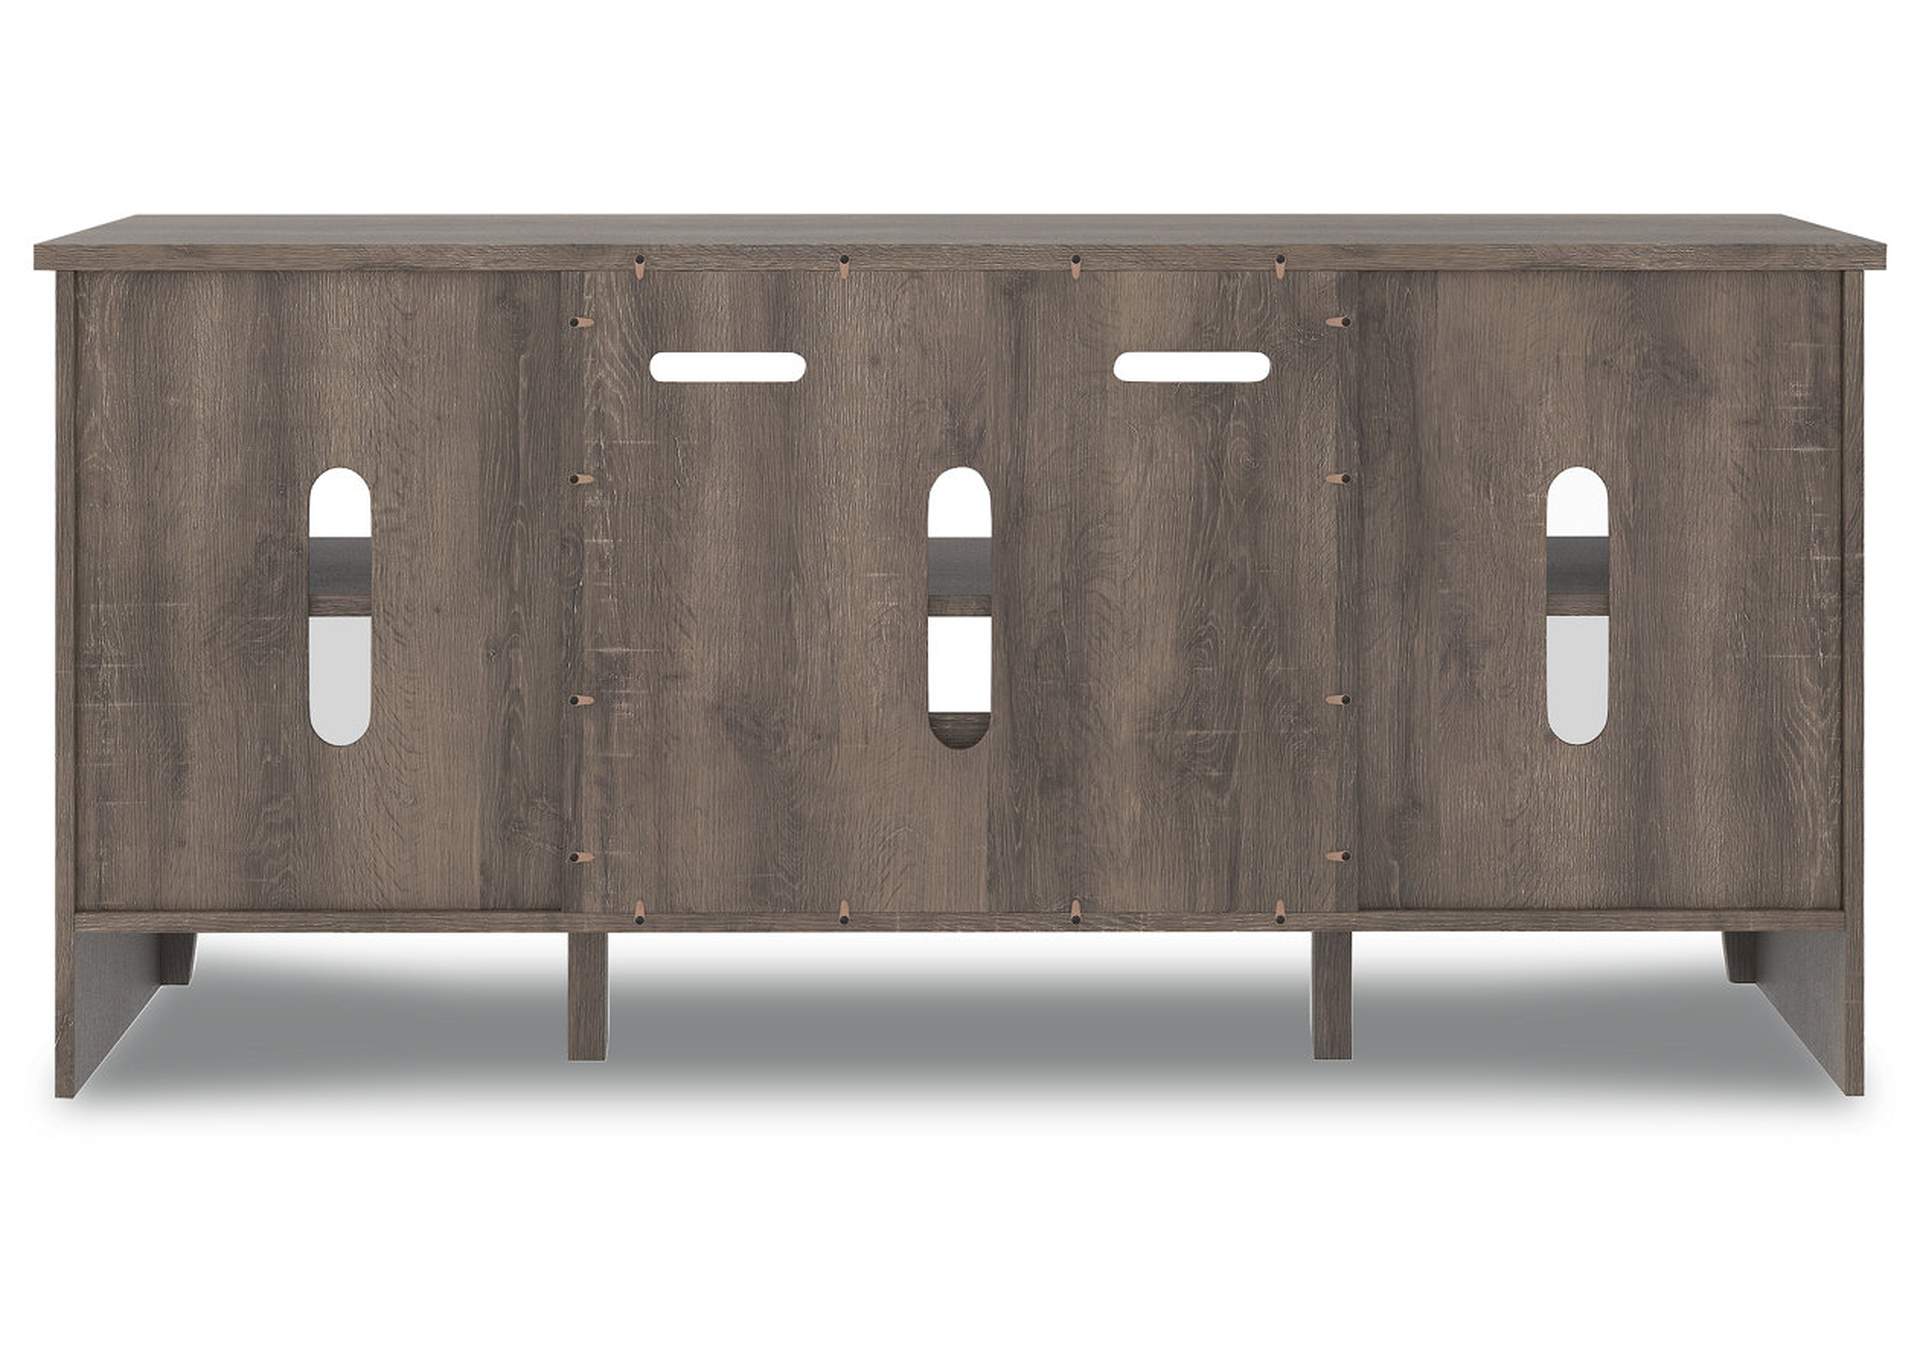 Arlenbry 60" TV Stand,Signature Design By Ashley